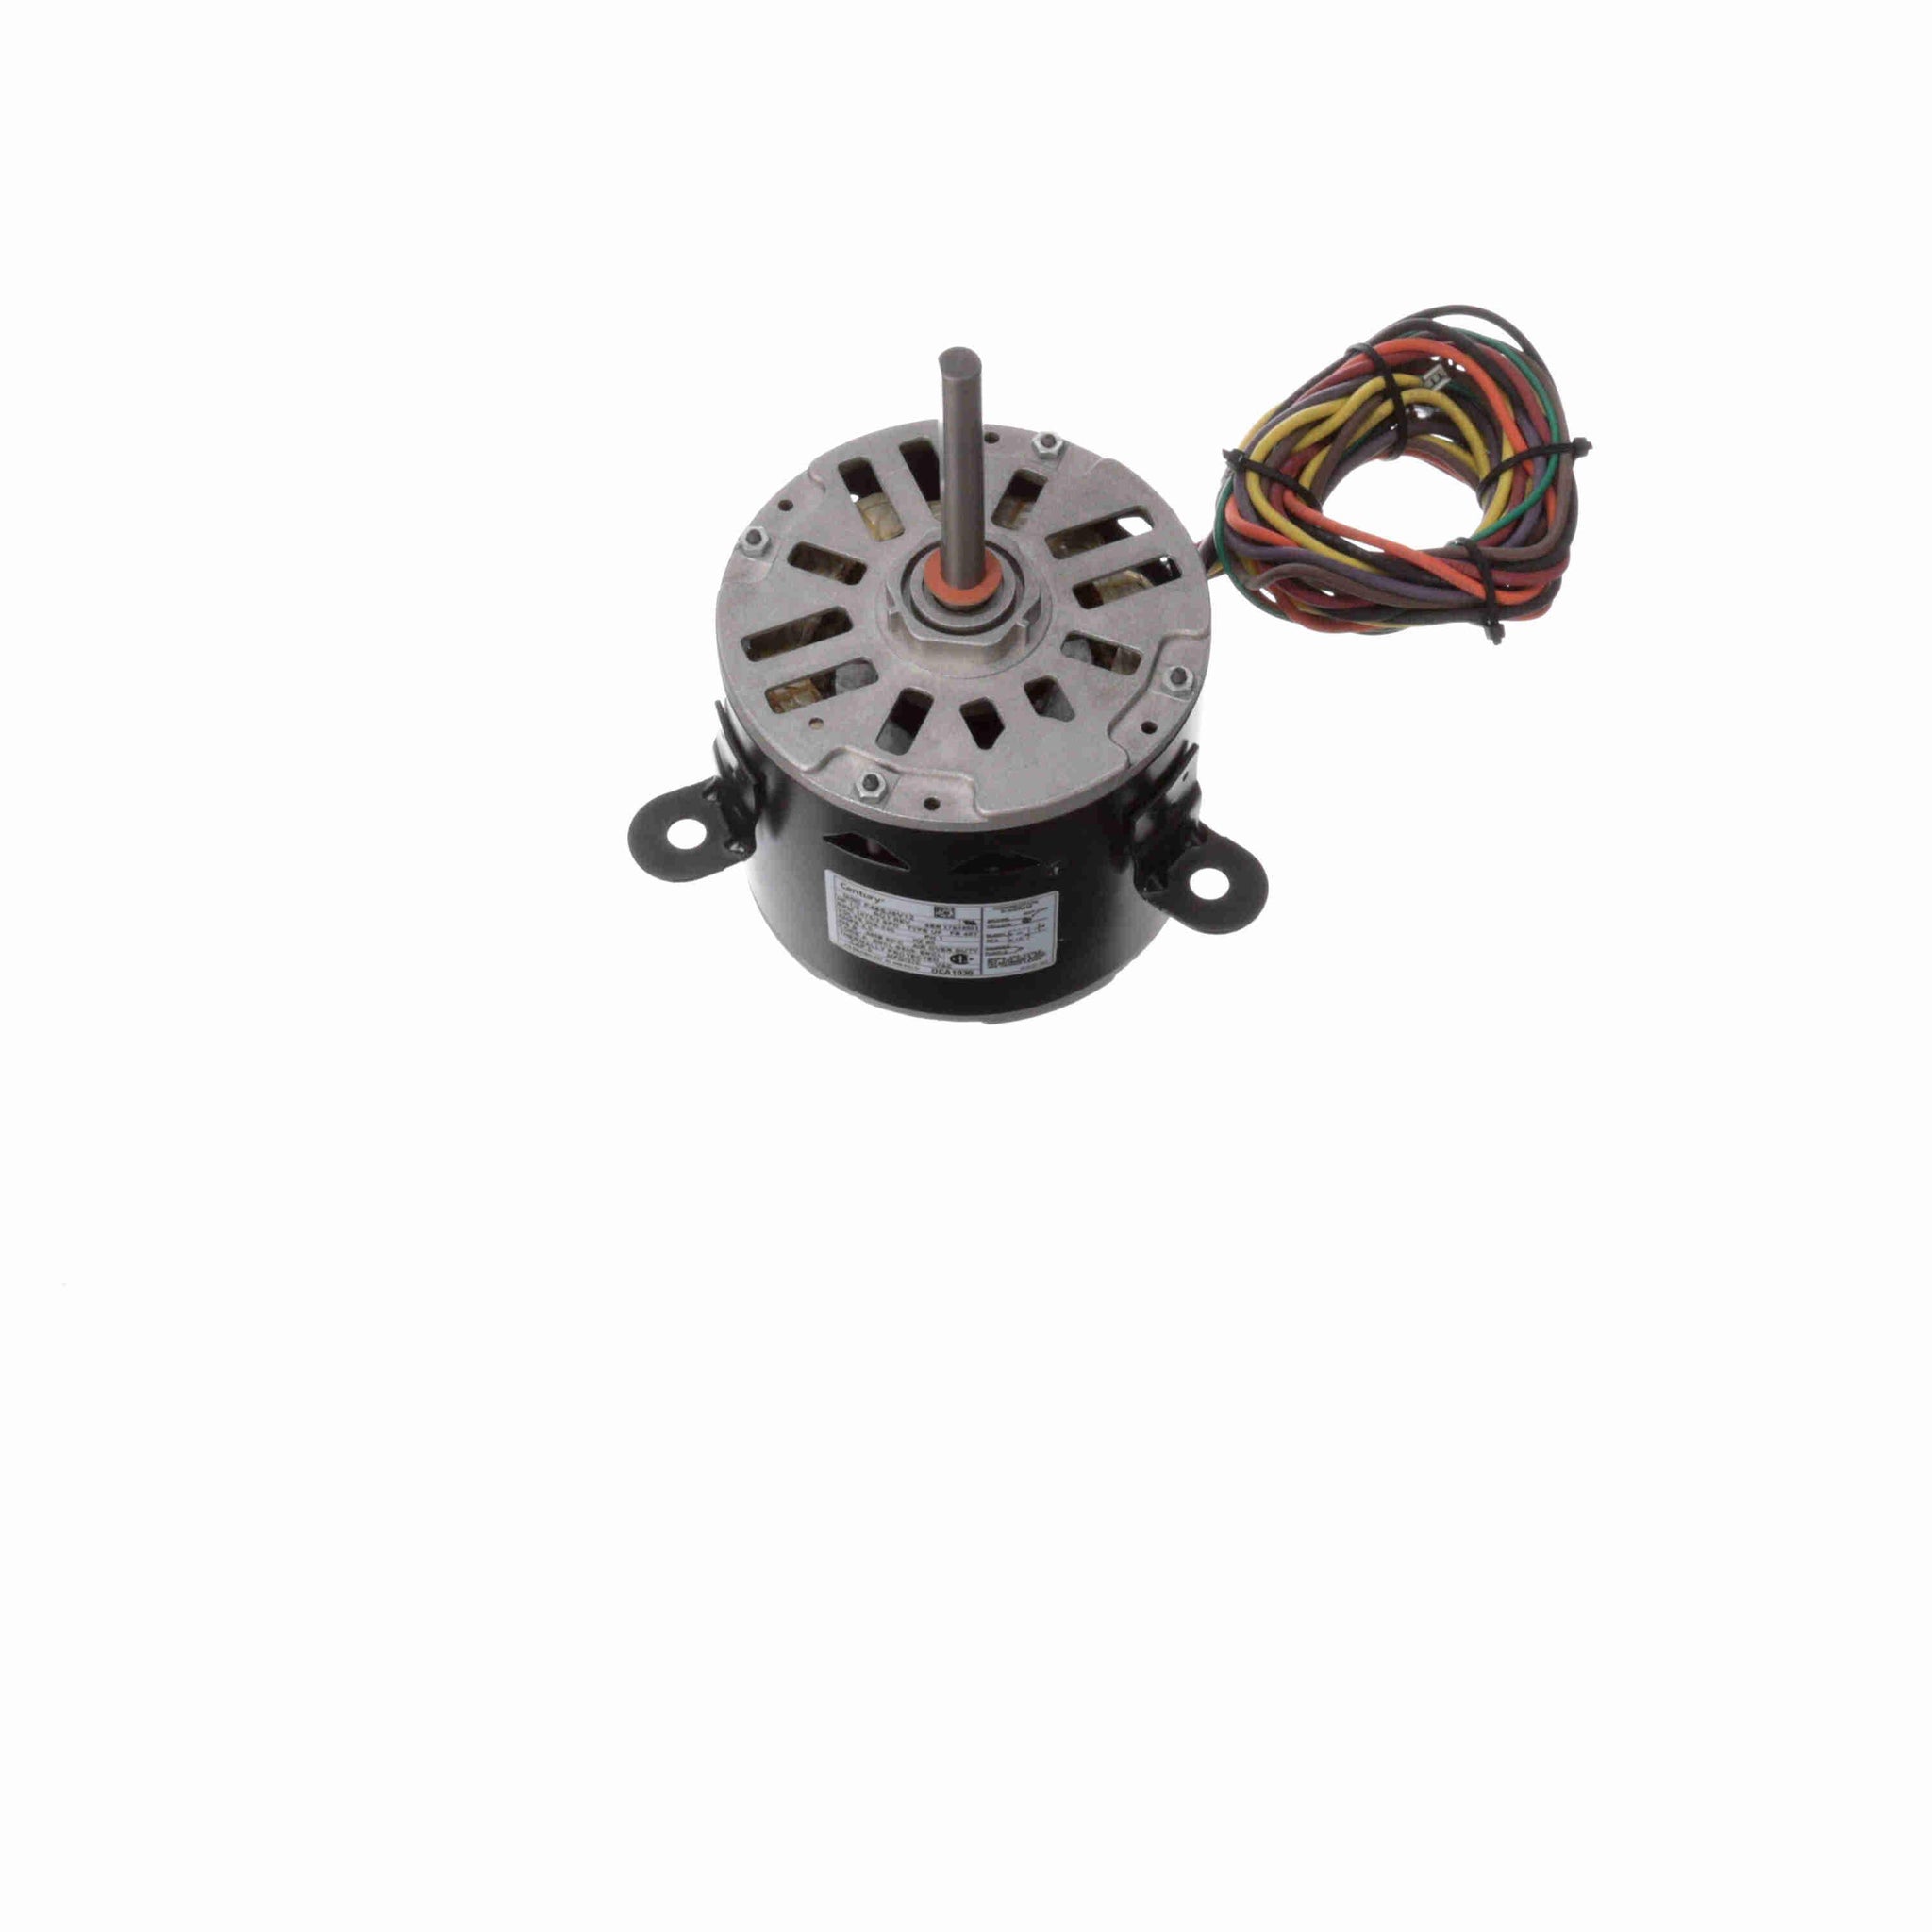 OCA1036 - 1/3 HP OEM Replacement Motor, 1075 RPM, 2 Speed, 208-230 Volts, 48 Frame, Semi Enclosed - Hardware & Moreee